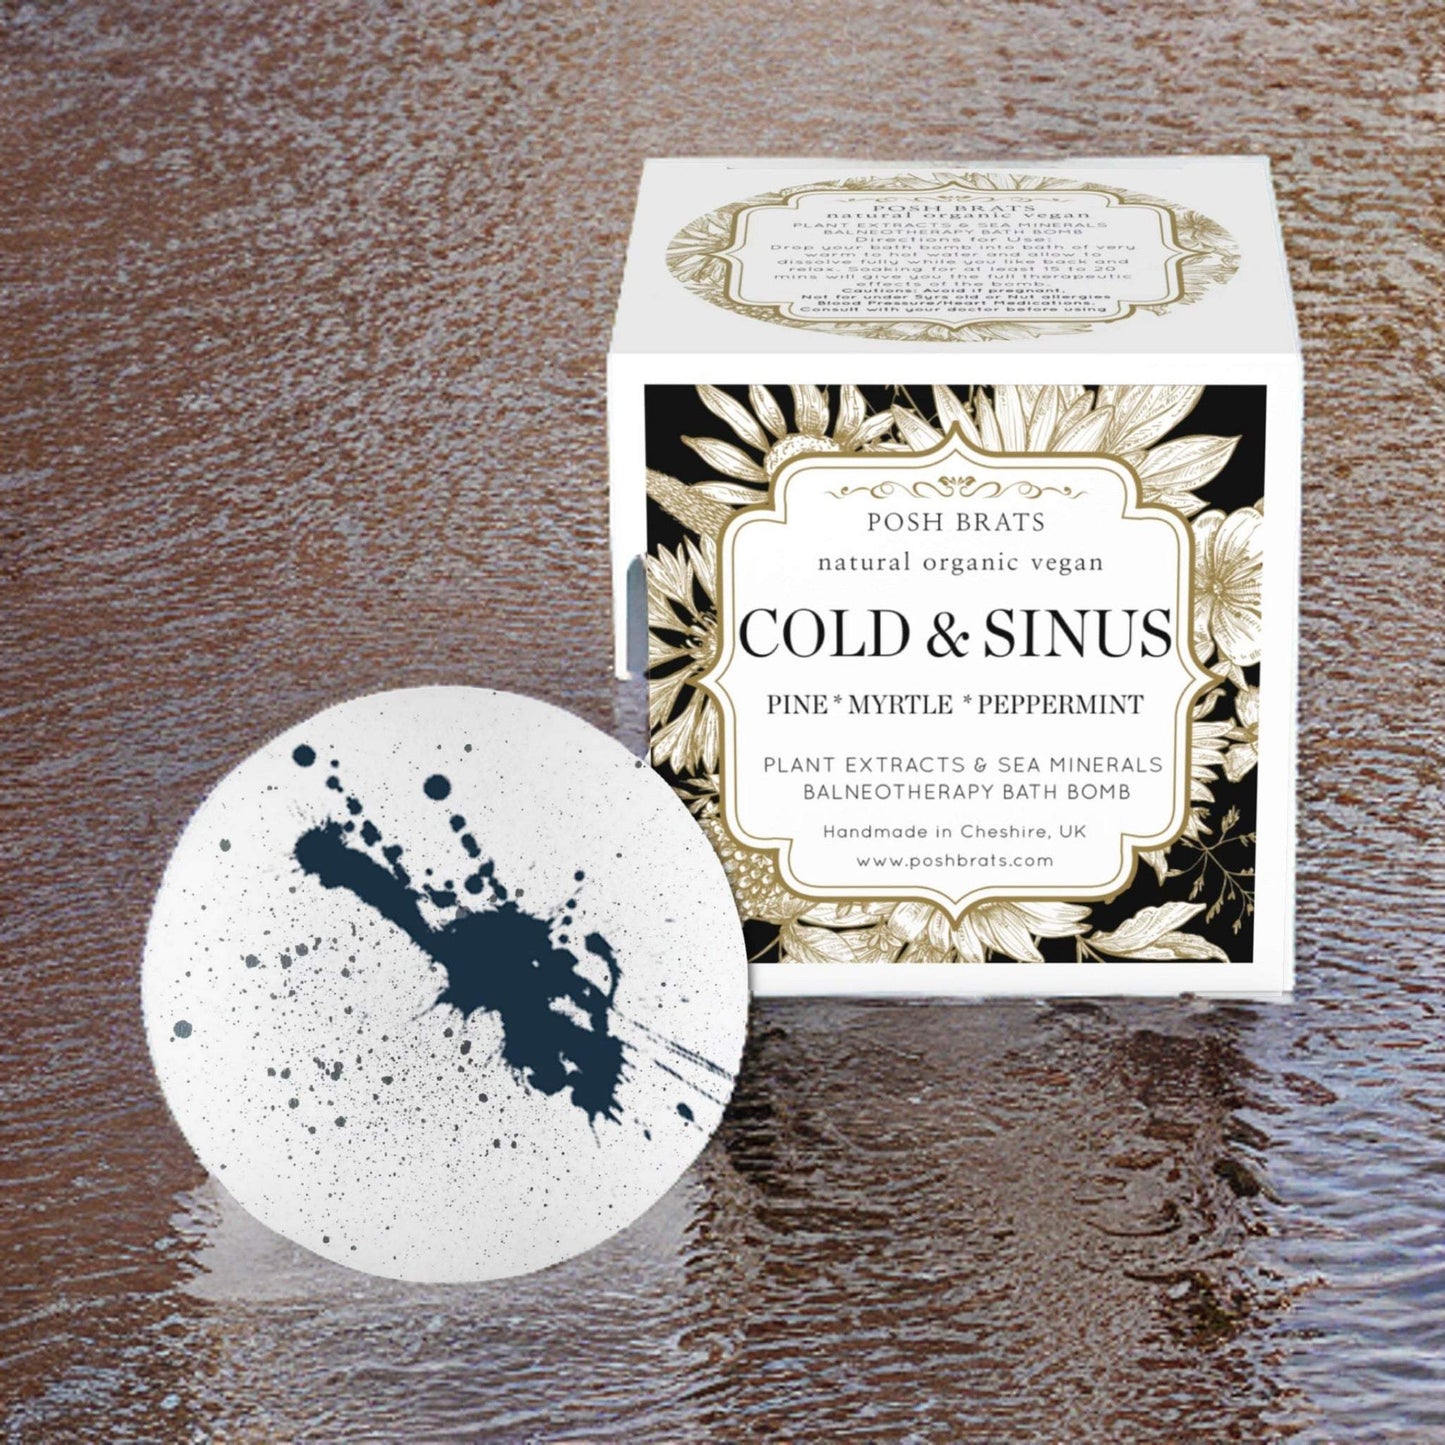 Experience the power of Cold Sinus Aromatherapy Bath Bomb Sea Minerals. Breath easier and relax in a warm bath.